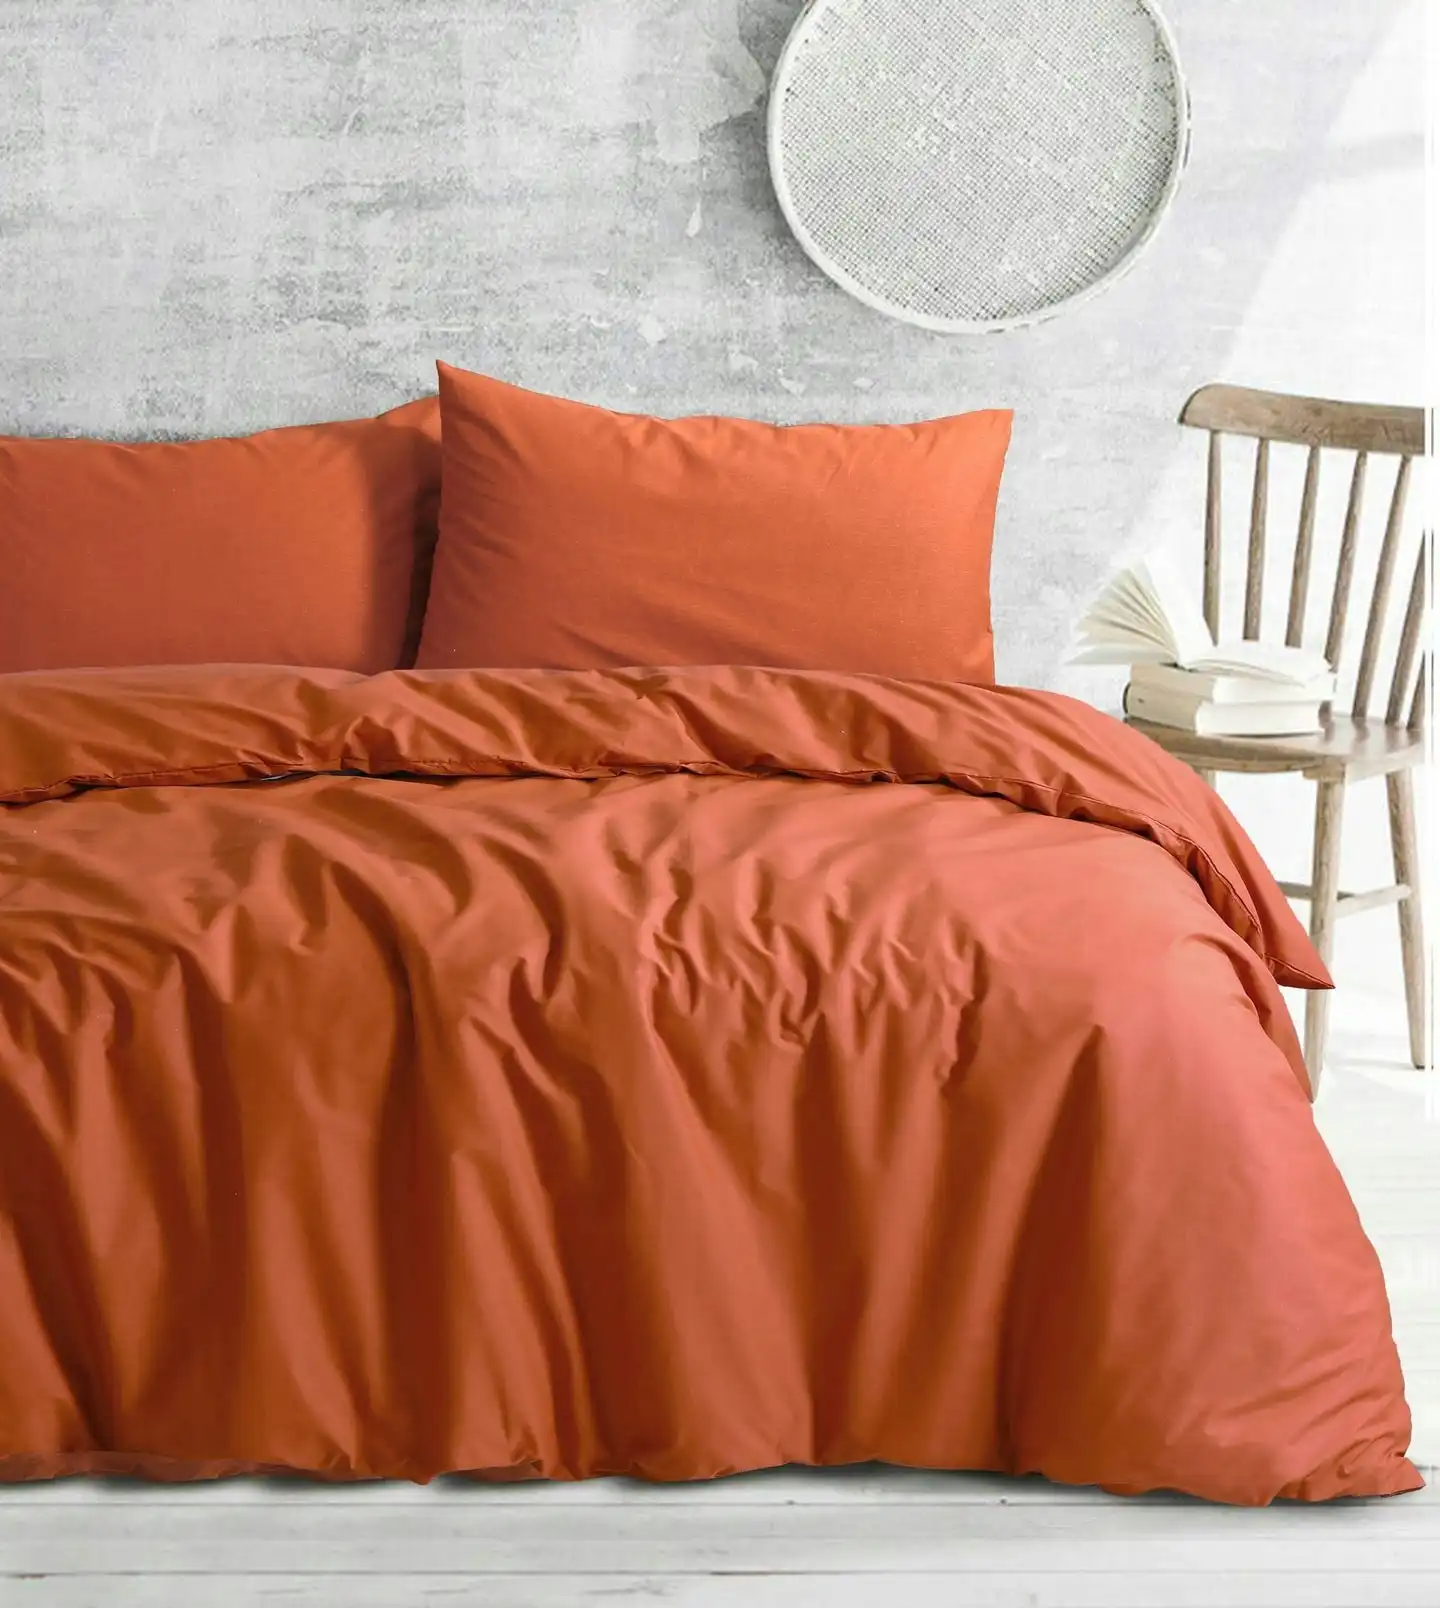 Amsons Royale Cotton Quilt Duvet Doona Cover Set with Europeon pillowcases - Rust